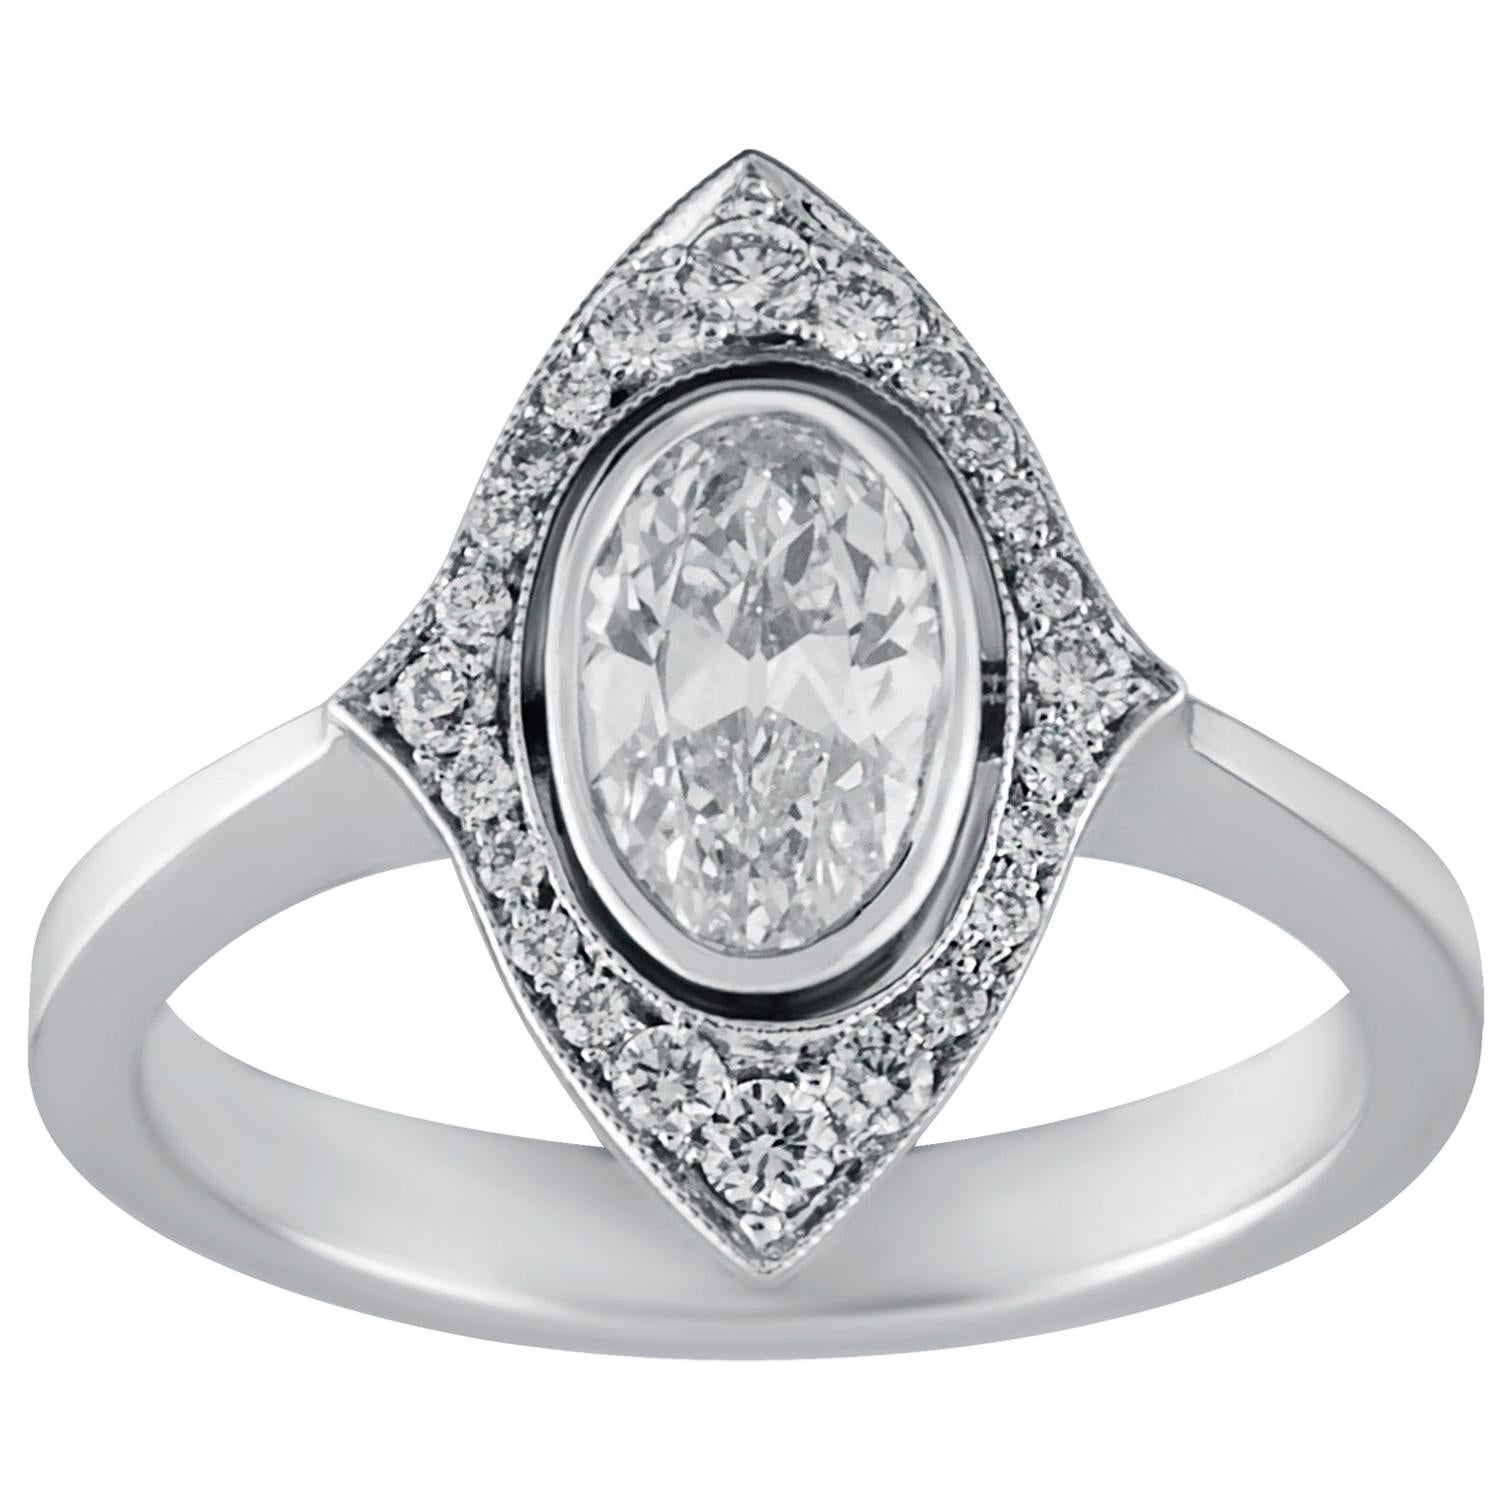 0.82 Carat Old Cut Oval Solitaire Diamond Ring in 18 Karat White Gold For Sale